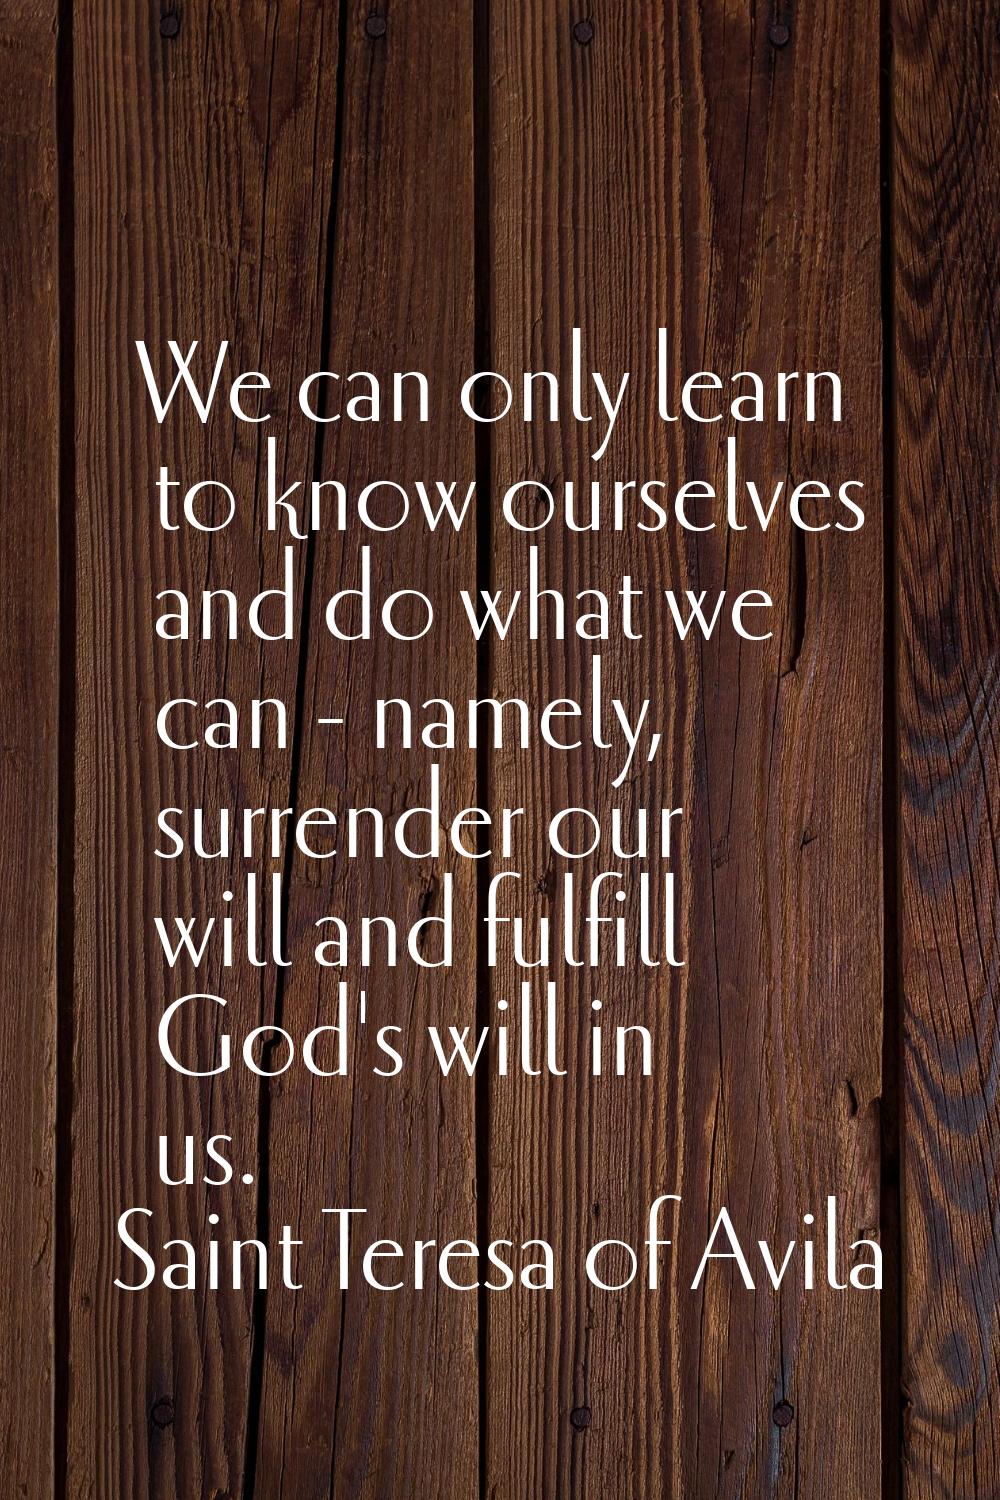 We can only learn to know ourselves and do what we can - namely, surrender our will and fulfill God